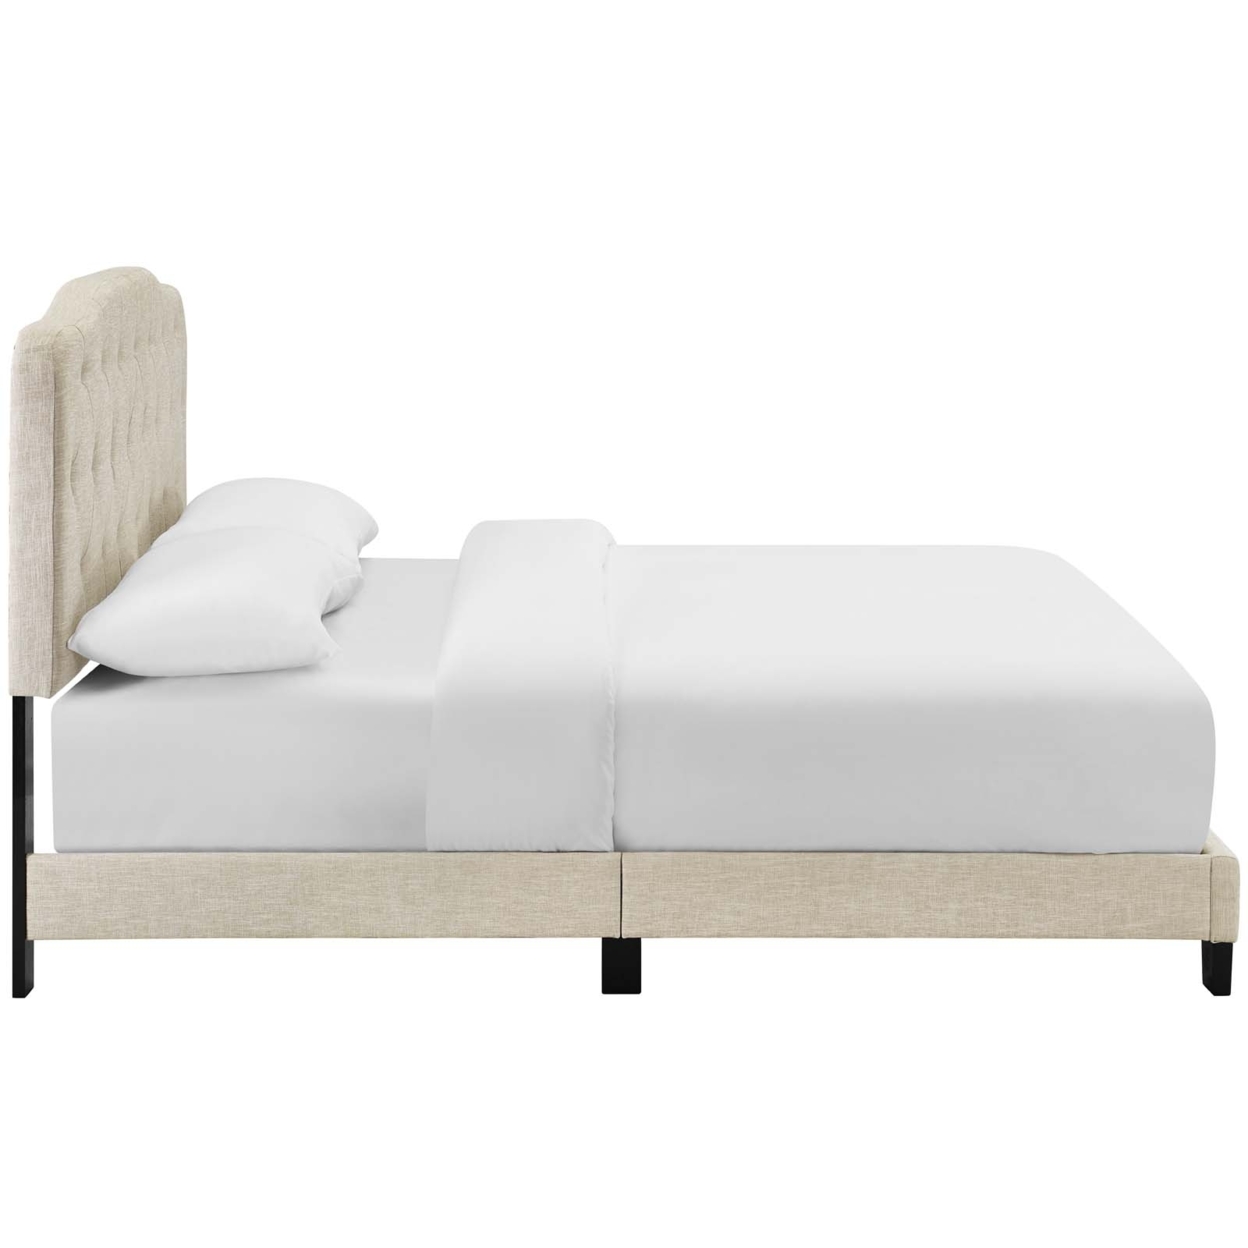 Amelia Full Upholstered Fabric Bed, Beige